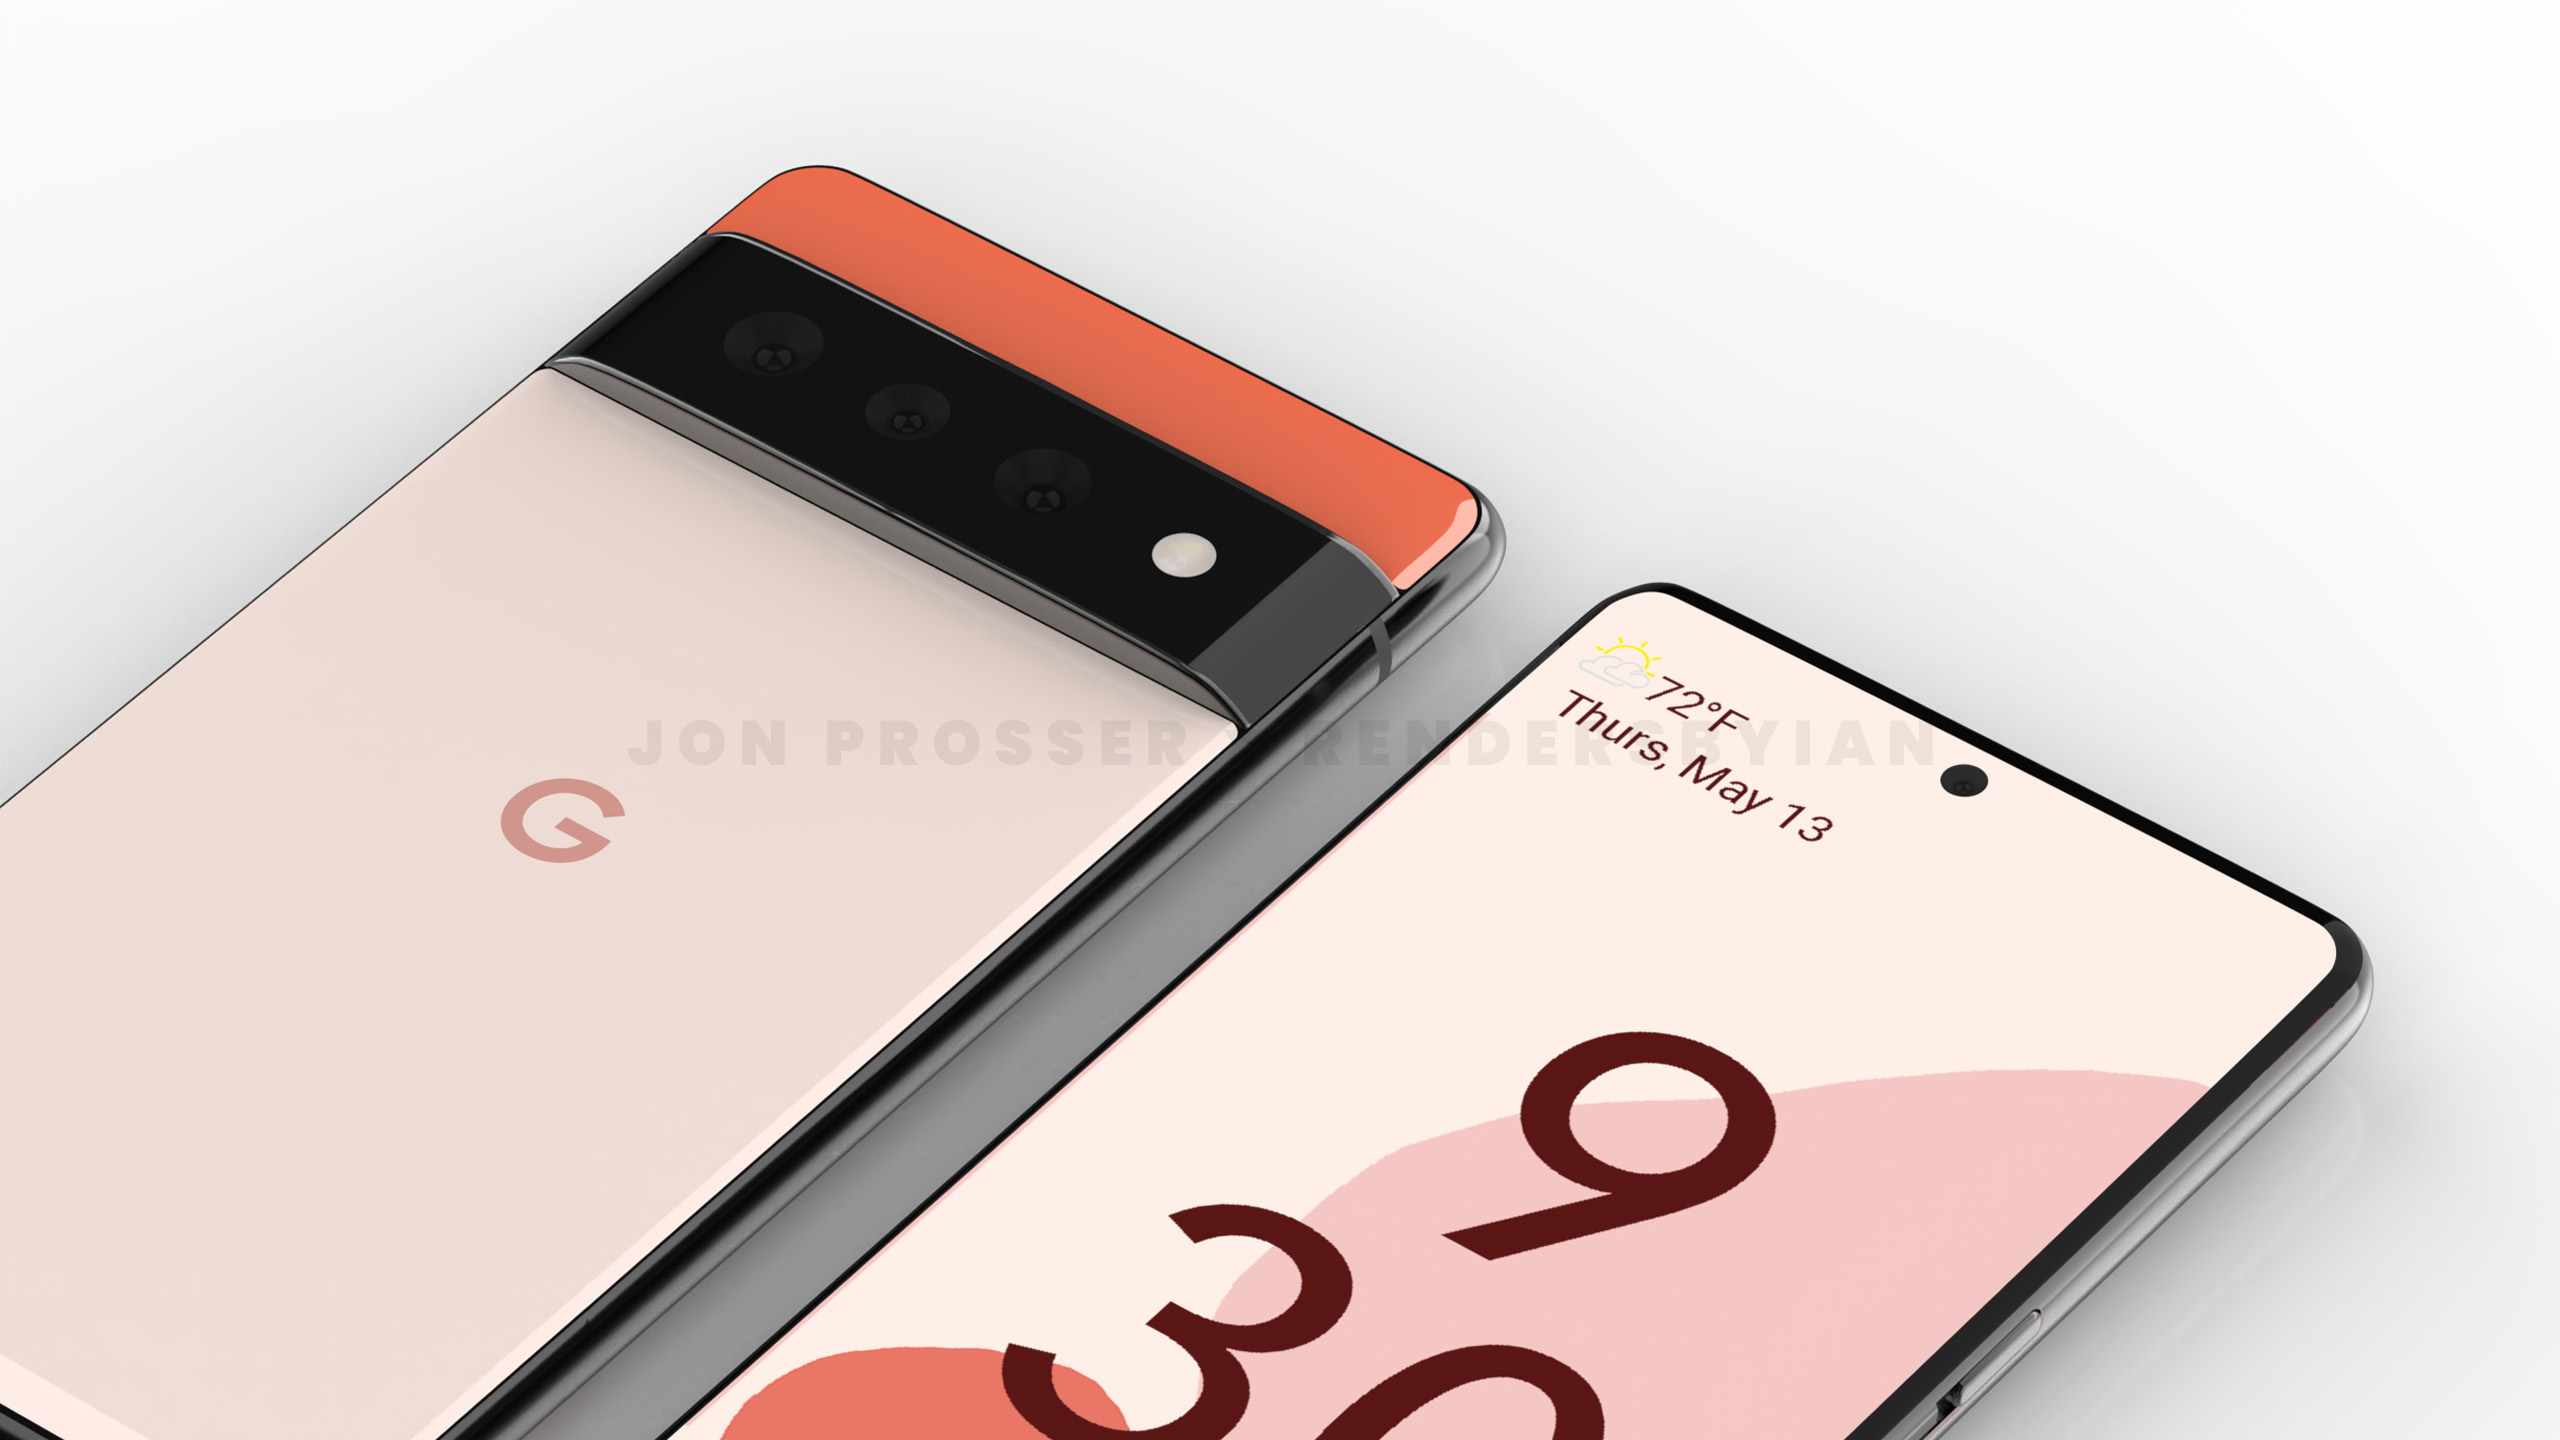 A leaked render showing the Pixel 6 Pro from the front and back